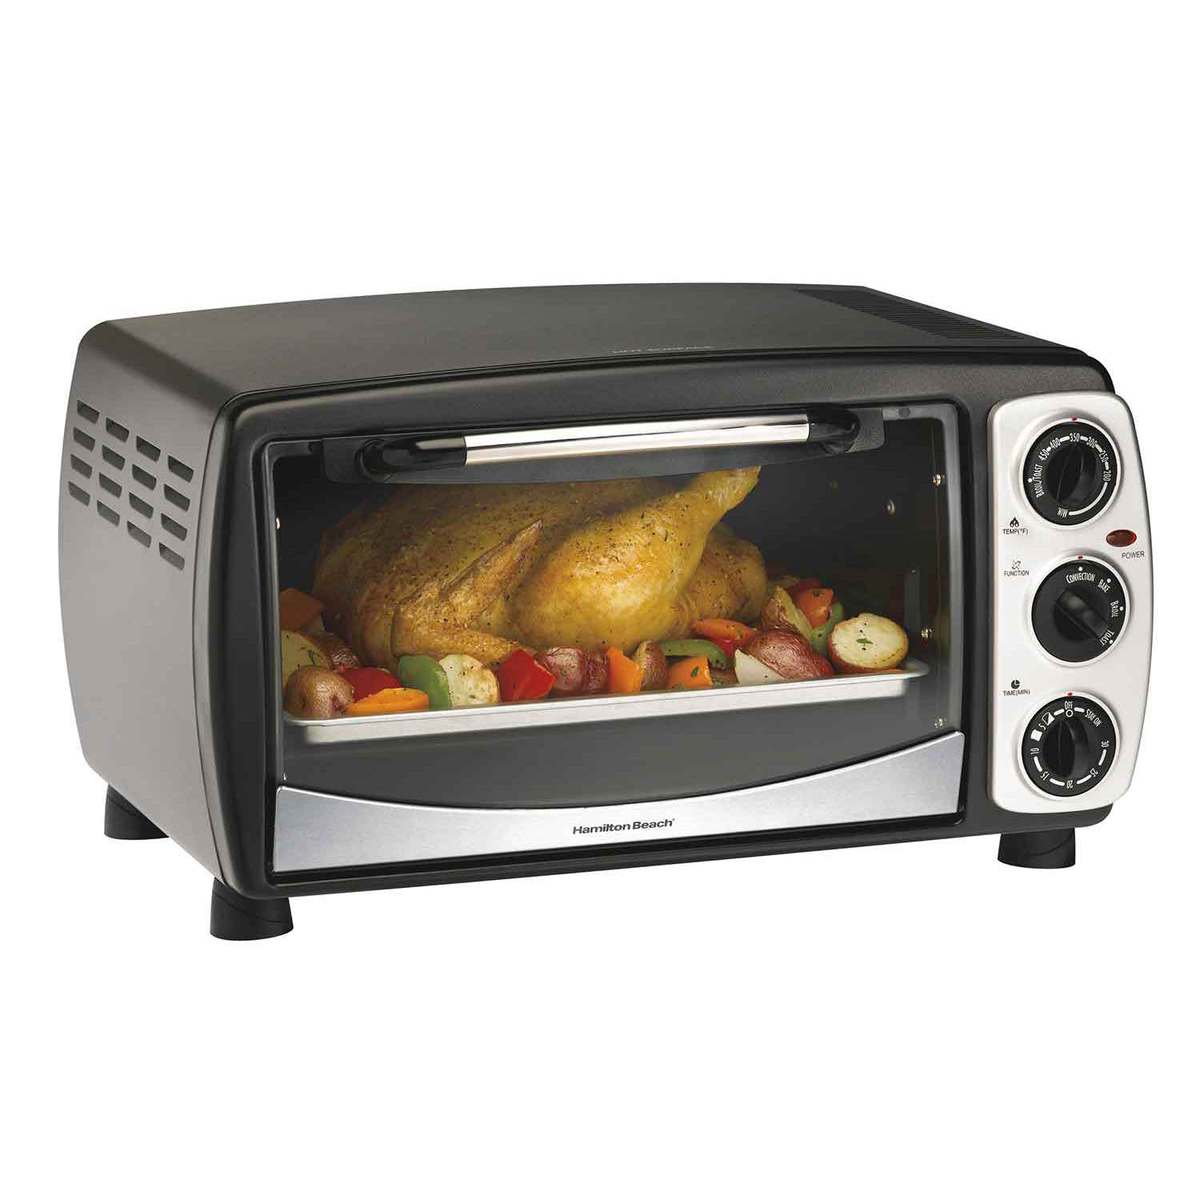 Convection 6 Slice Toaster/Oven Broiler (31207)